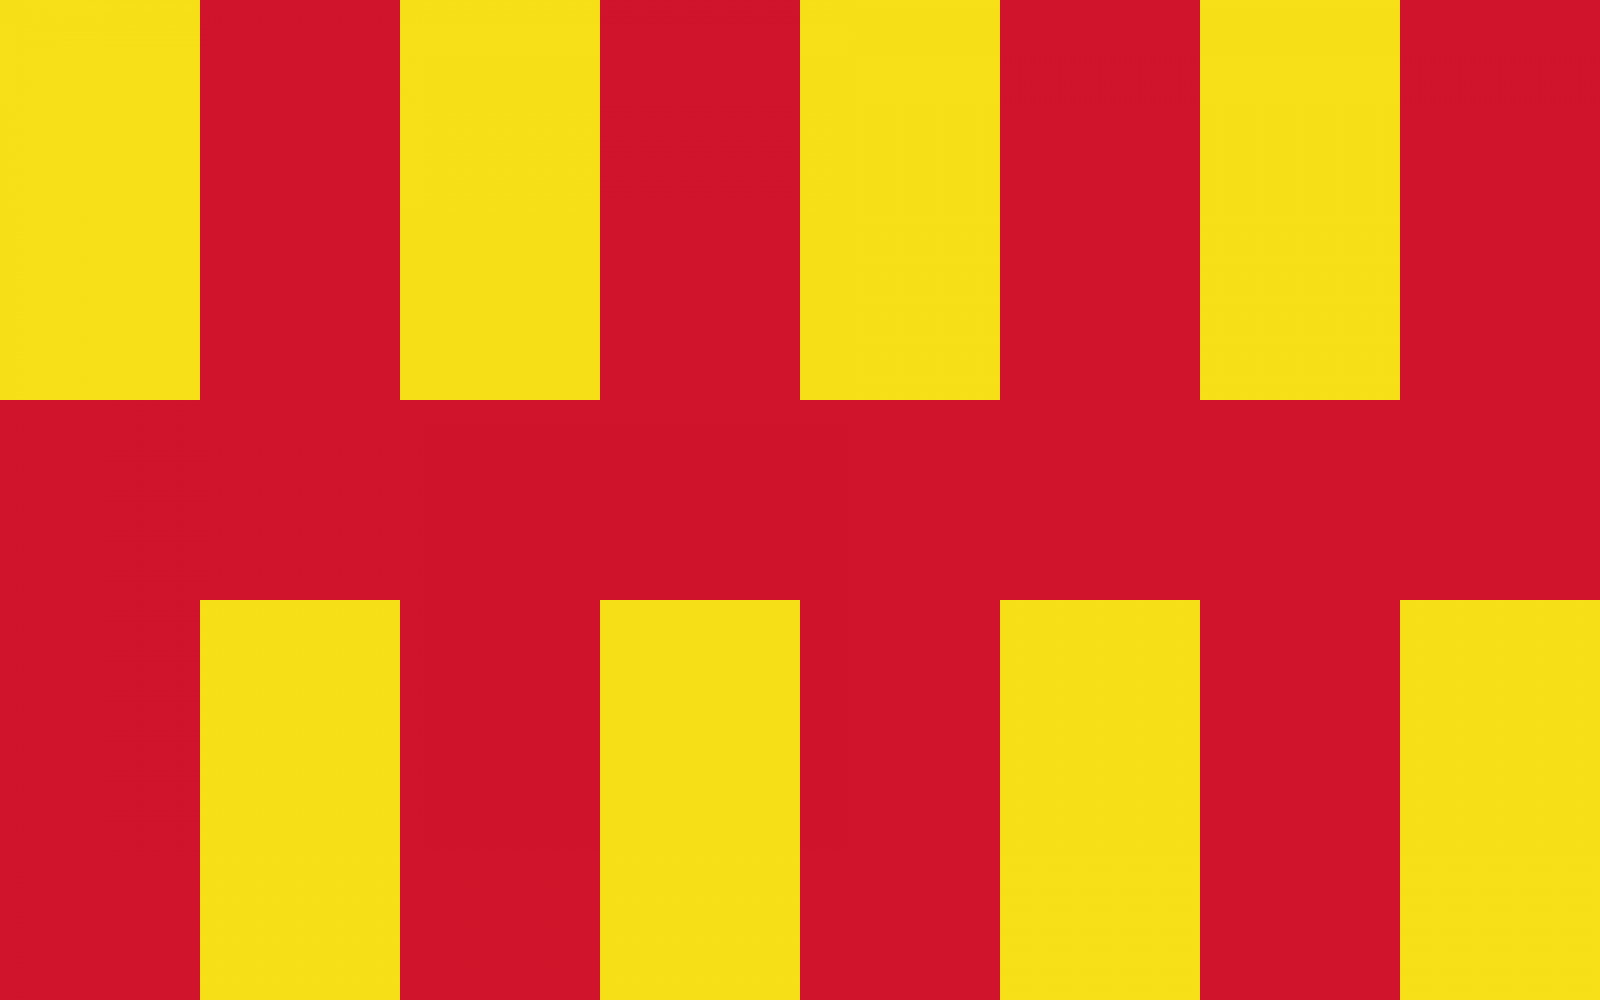 The flag of the historic county of Northumberland